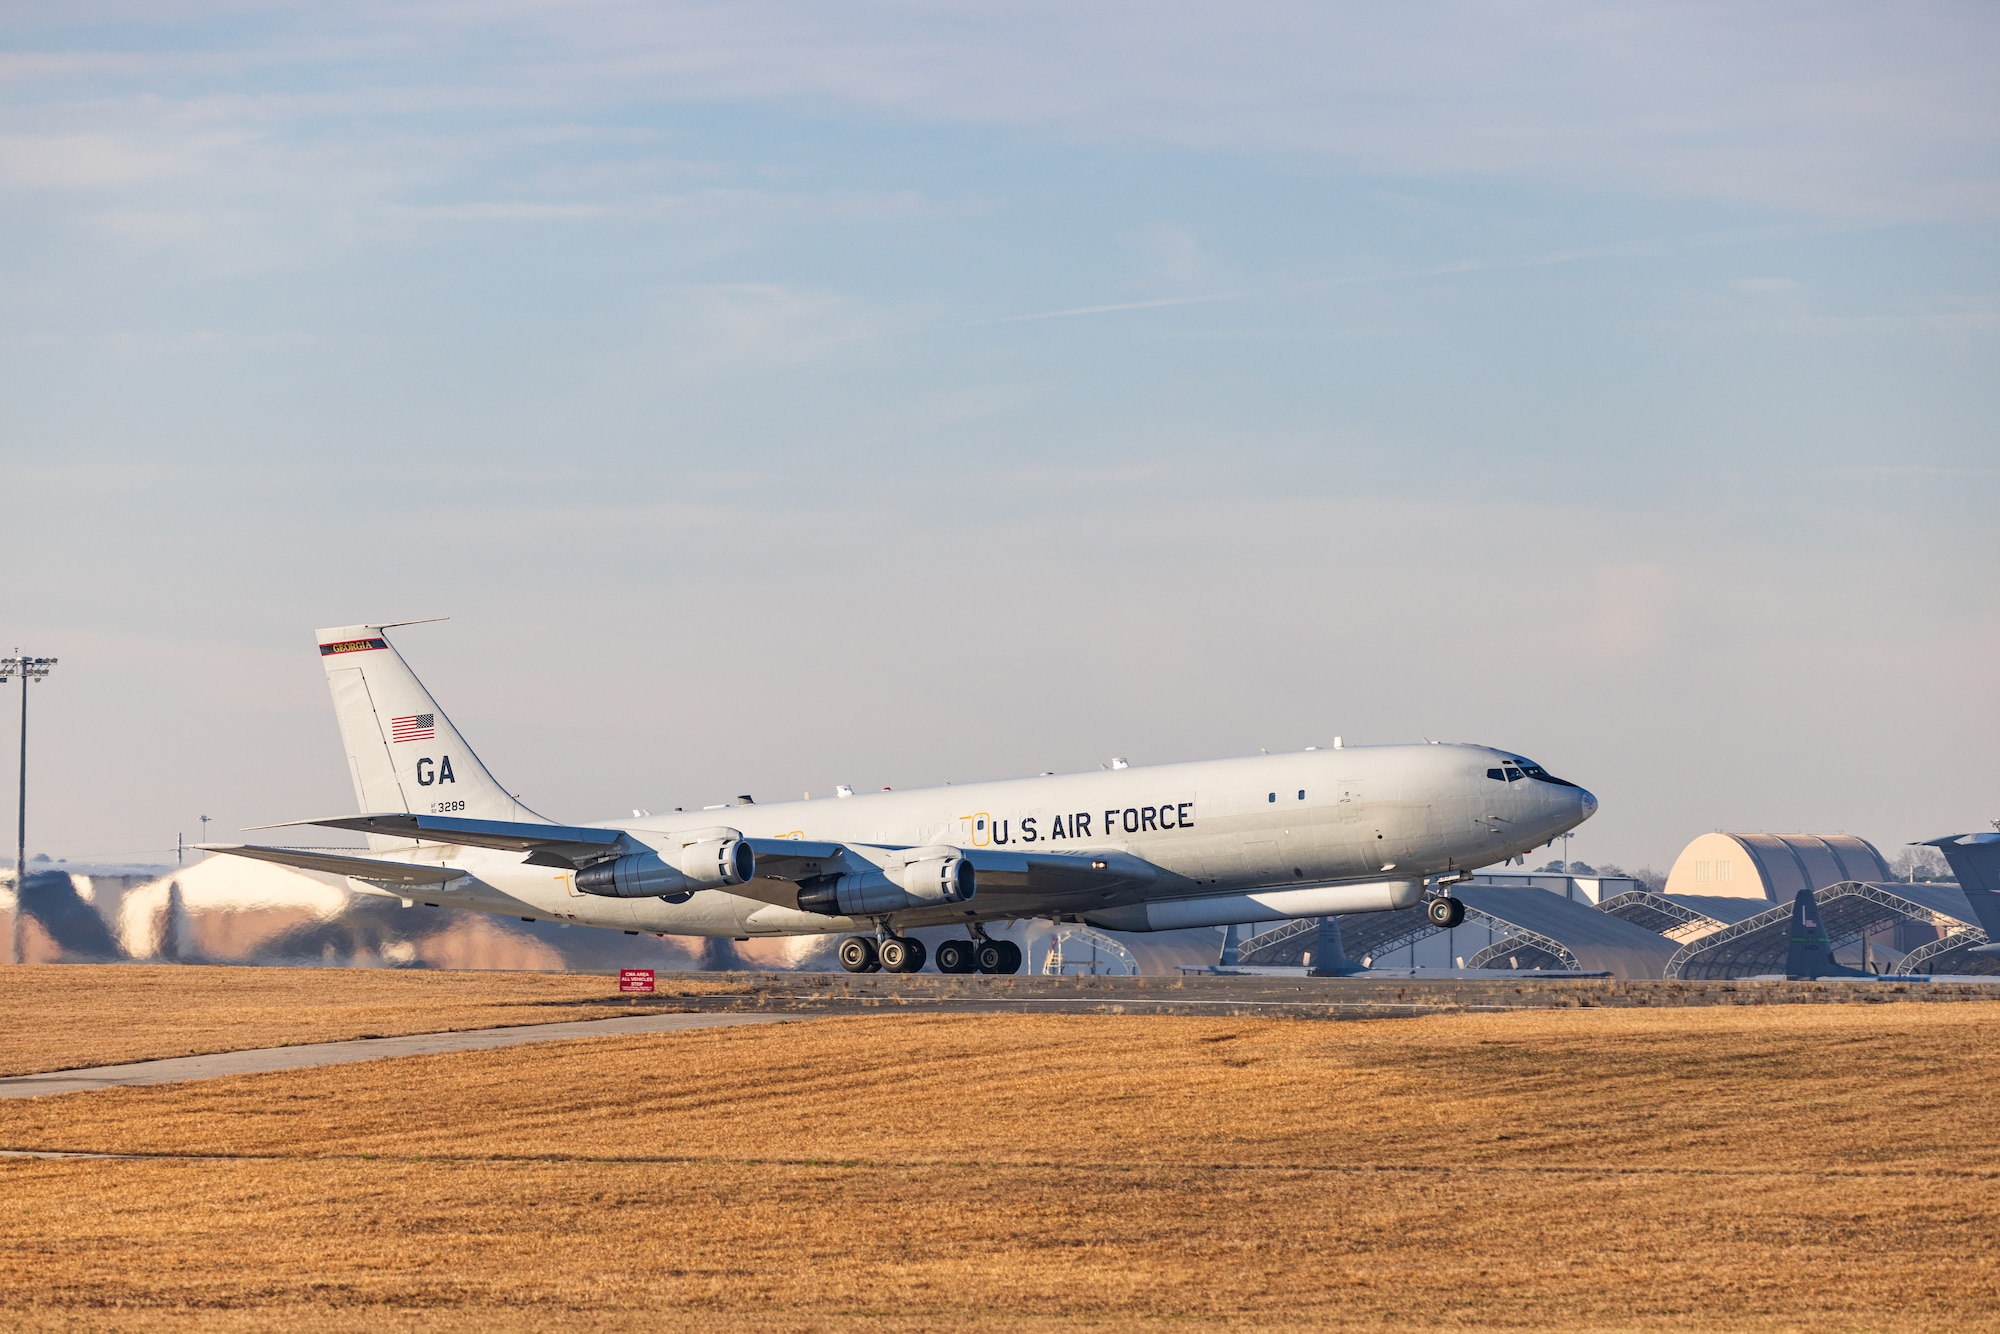 E-8C Joint STARS aircraft 92-3289 departs one last time from Robins Air Force Base, Georgia, Feb. 11, 2022. The aircraft has been in military service since 1996 and will retire to its final resting place with the 309th Aerospace Maintenance and Regeneration Group at Davis-Monthan Air Force Base, Arizona. (U.S. Air National Guard photo by Tech. Sgt. Jeff Rice)